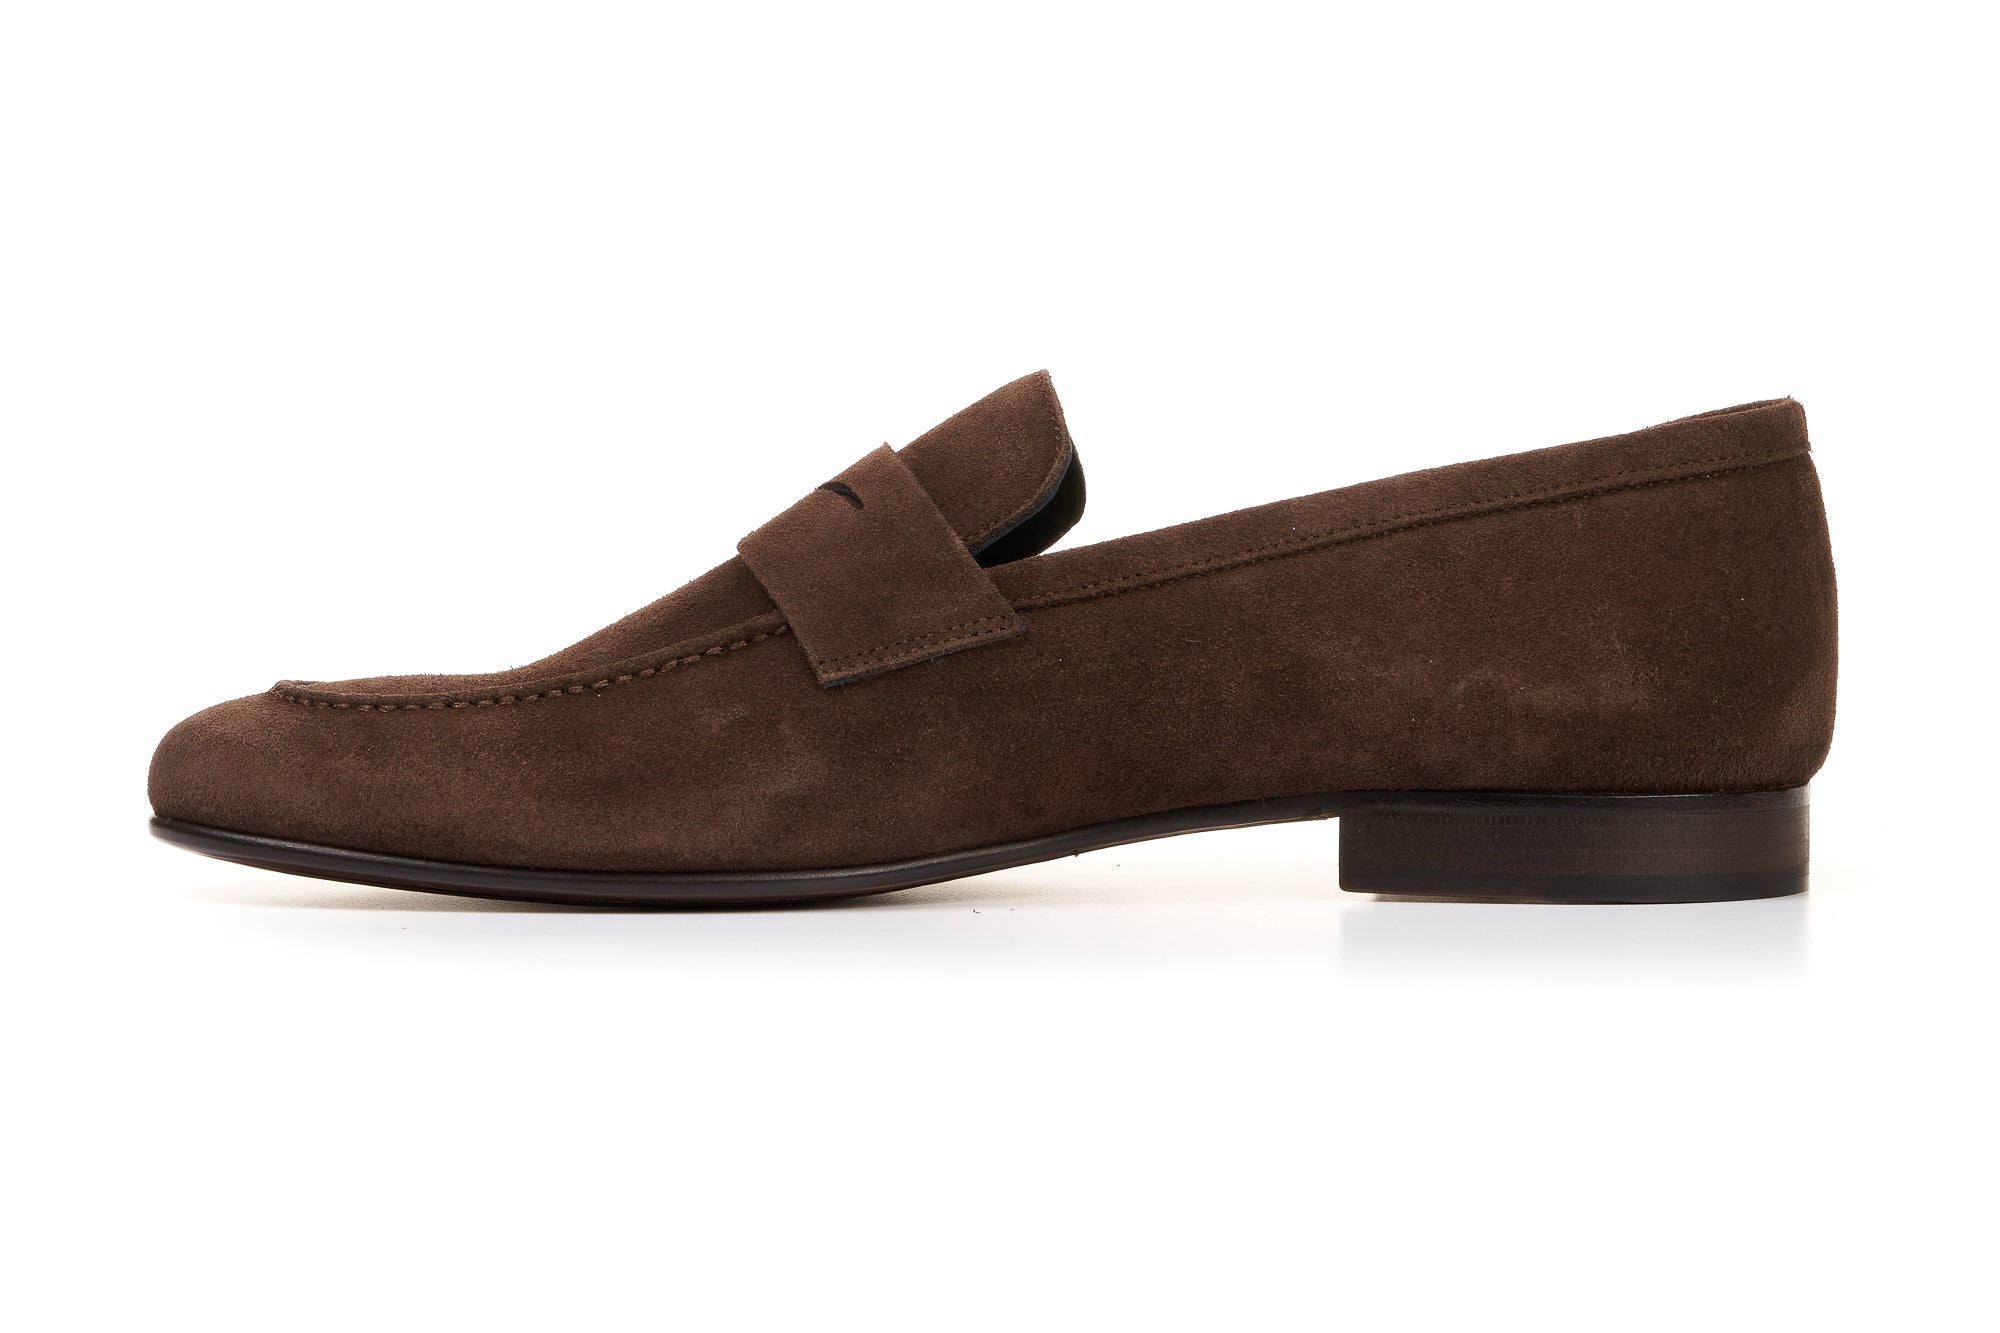 The Edward Penny Loafer - Dark Brown Suede